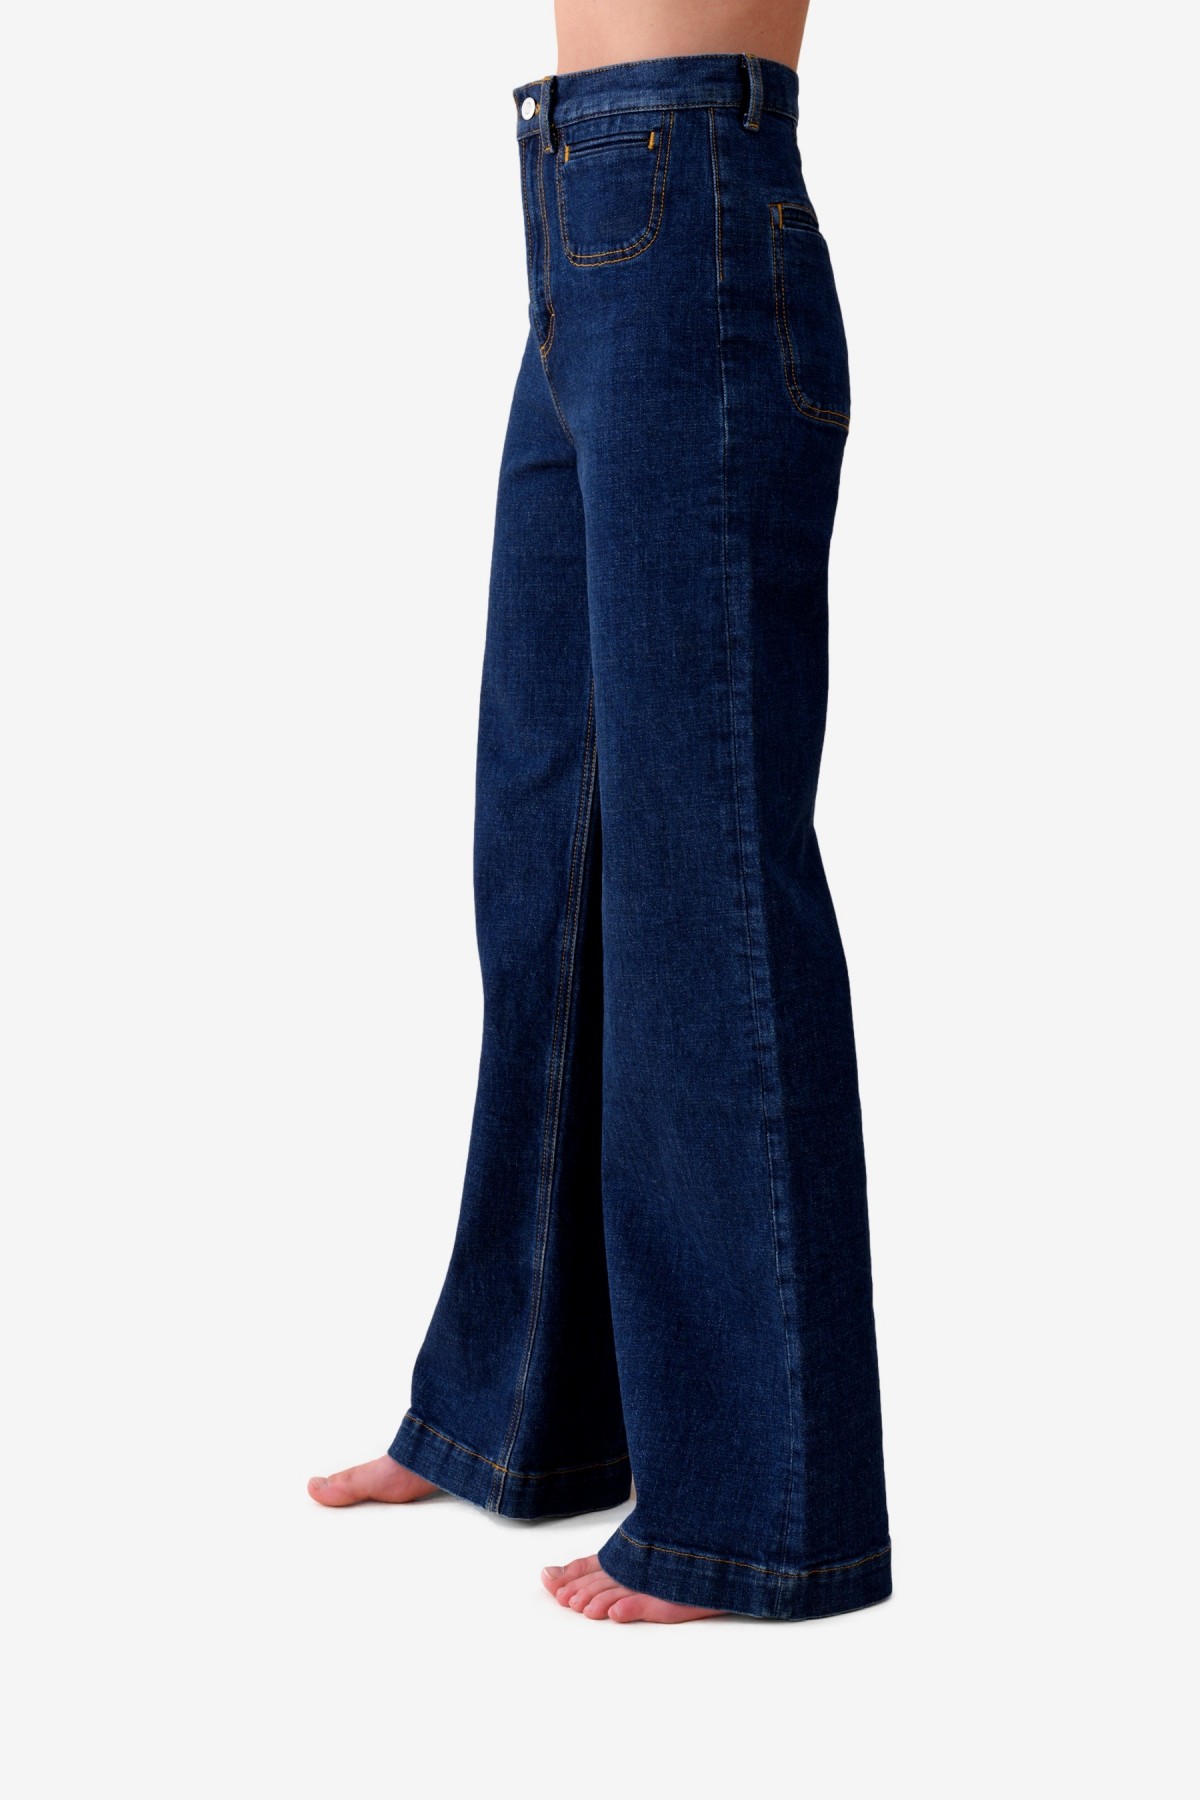 Jeanerica RW013 Roma Jeans in Blue 2 Weeks